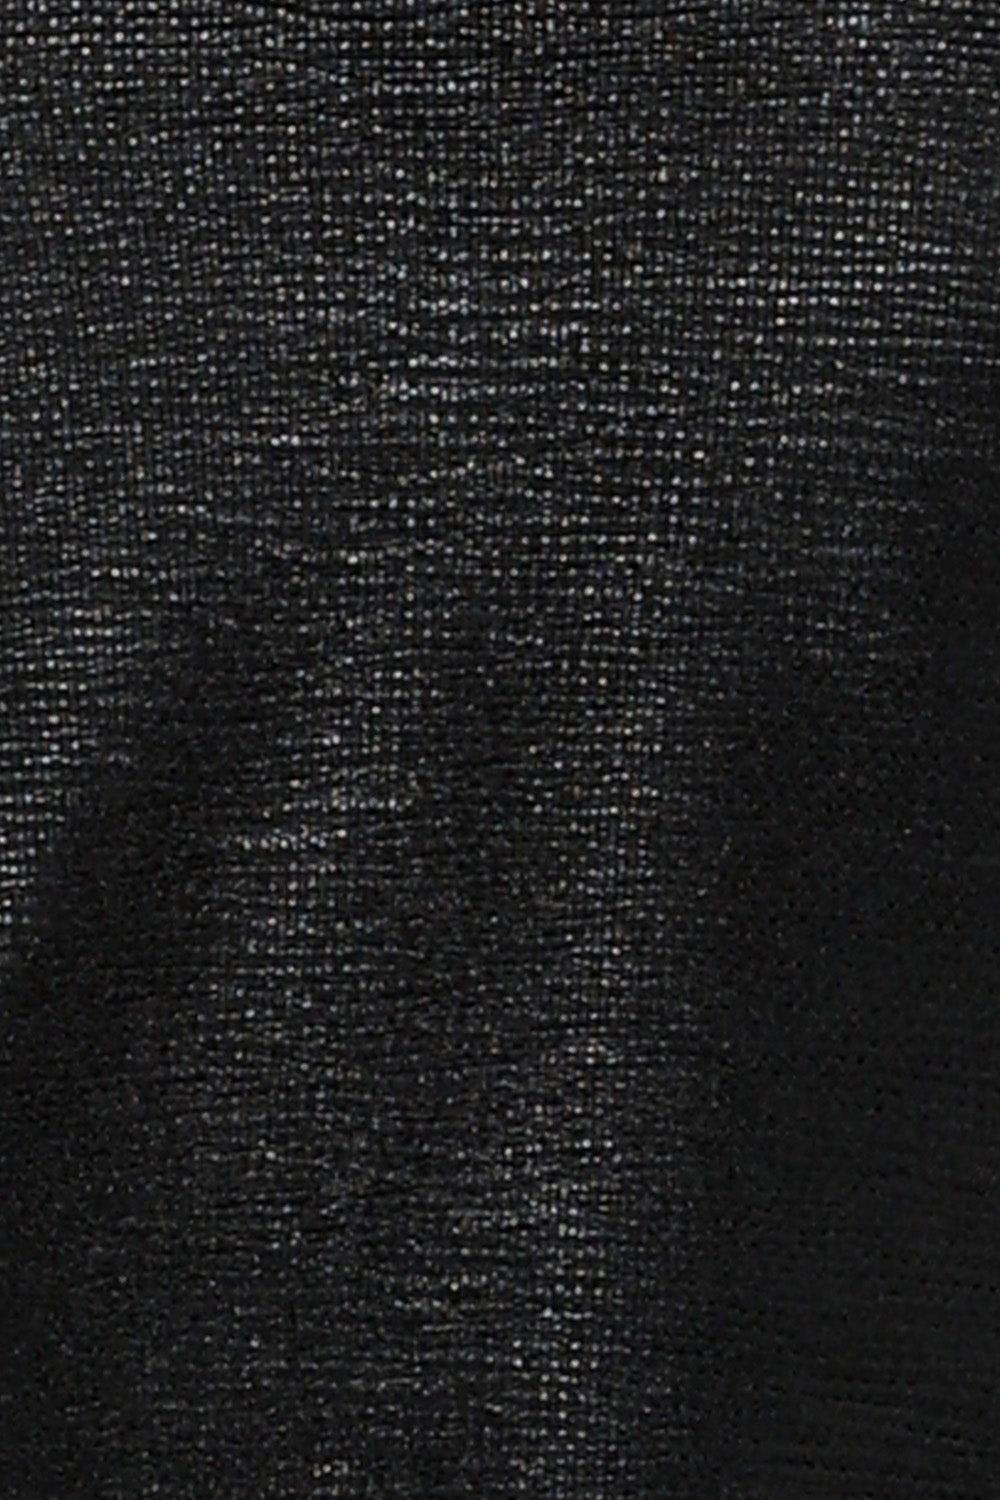 fabric swatch of Black Xanadu, a shimmering jersey fabric in shades of black, this sparkly fabric is used by Australian and New Zealand women's fashion brand, L&F to make evening tops and skirts in their new occasionwear collection.